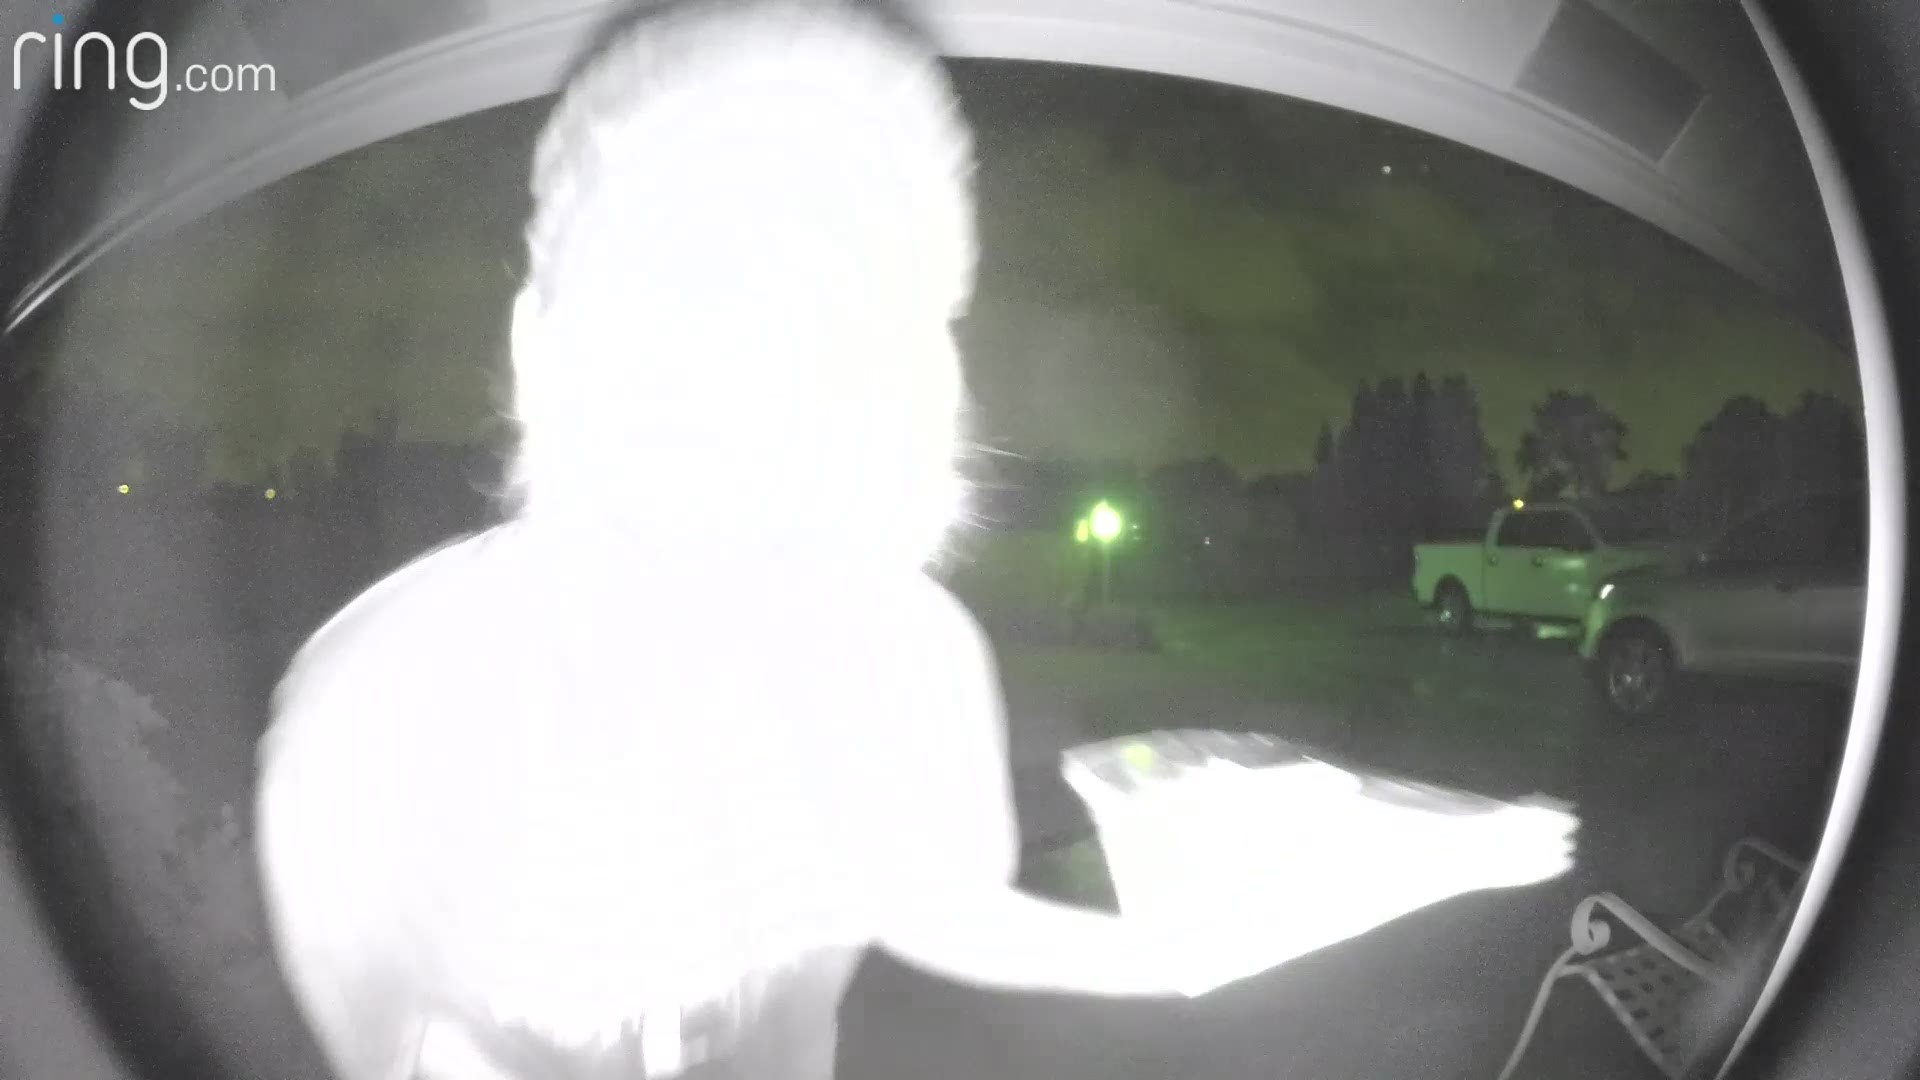 This time a man was busted licking a Ring Doorbell in Lake Worth, Florida.